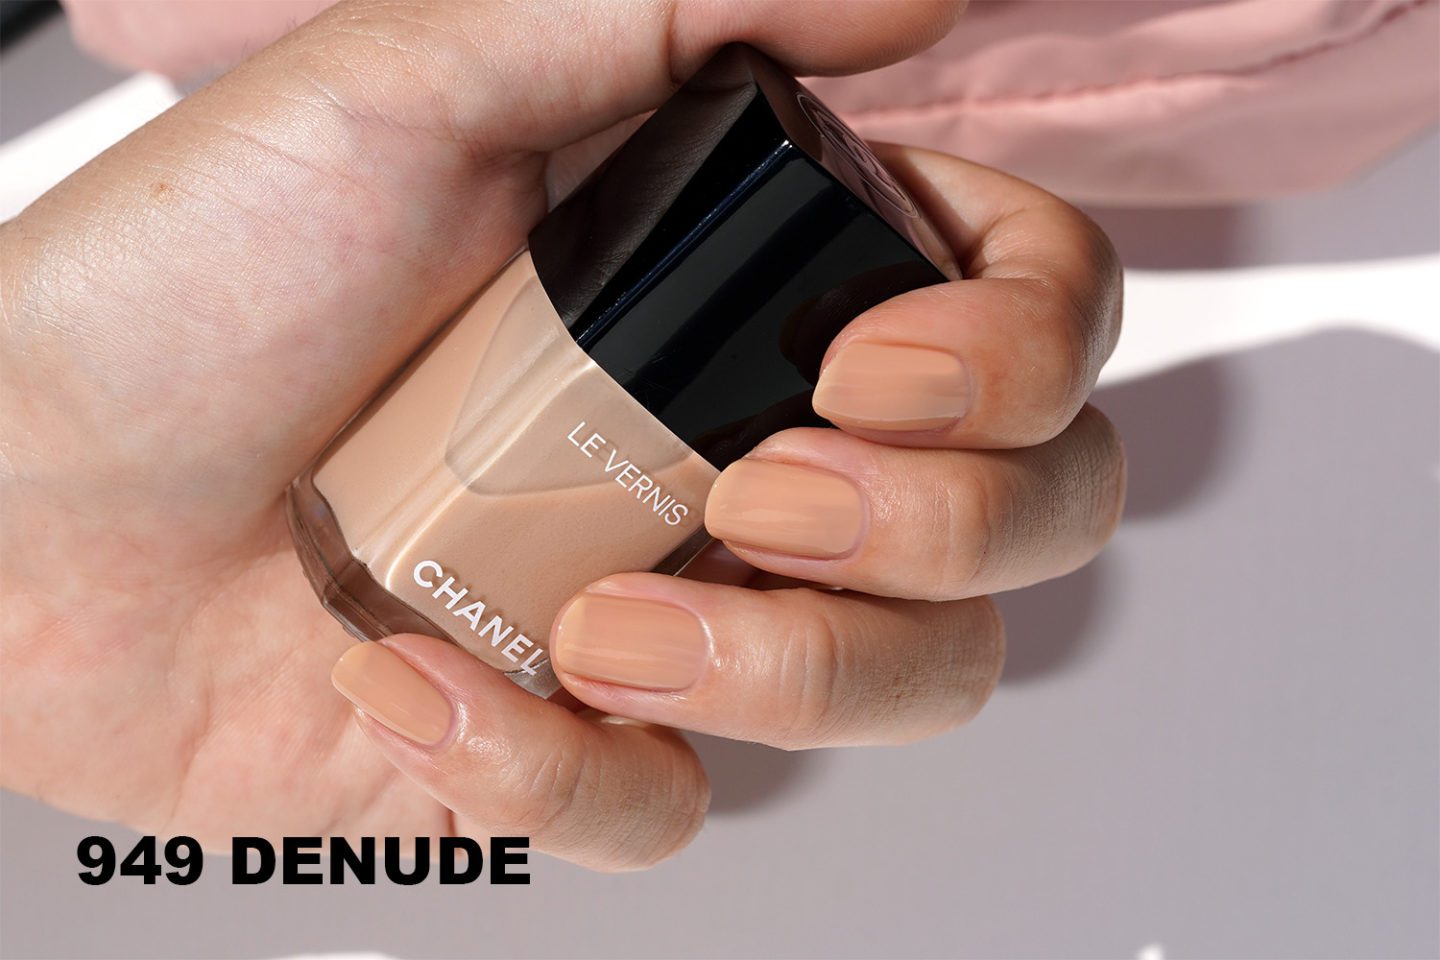 Chanel Le Vernis 949 Denude swatch